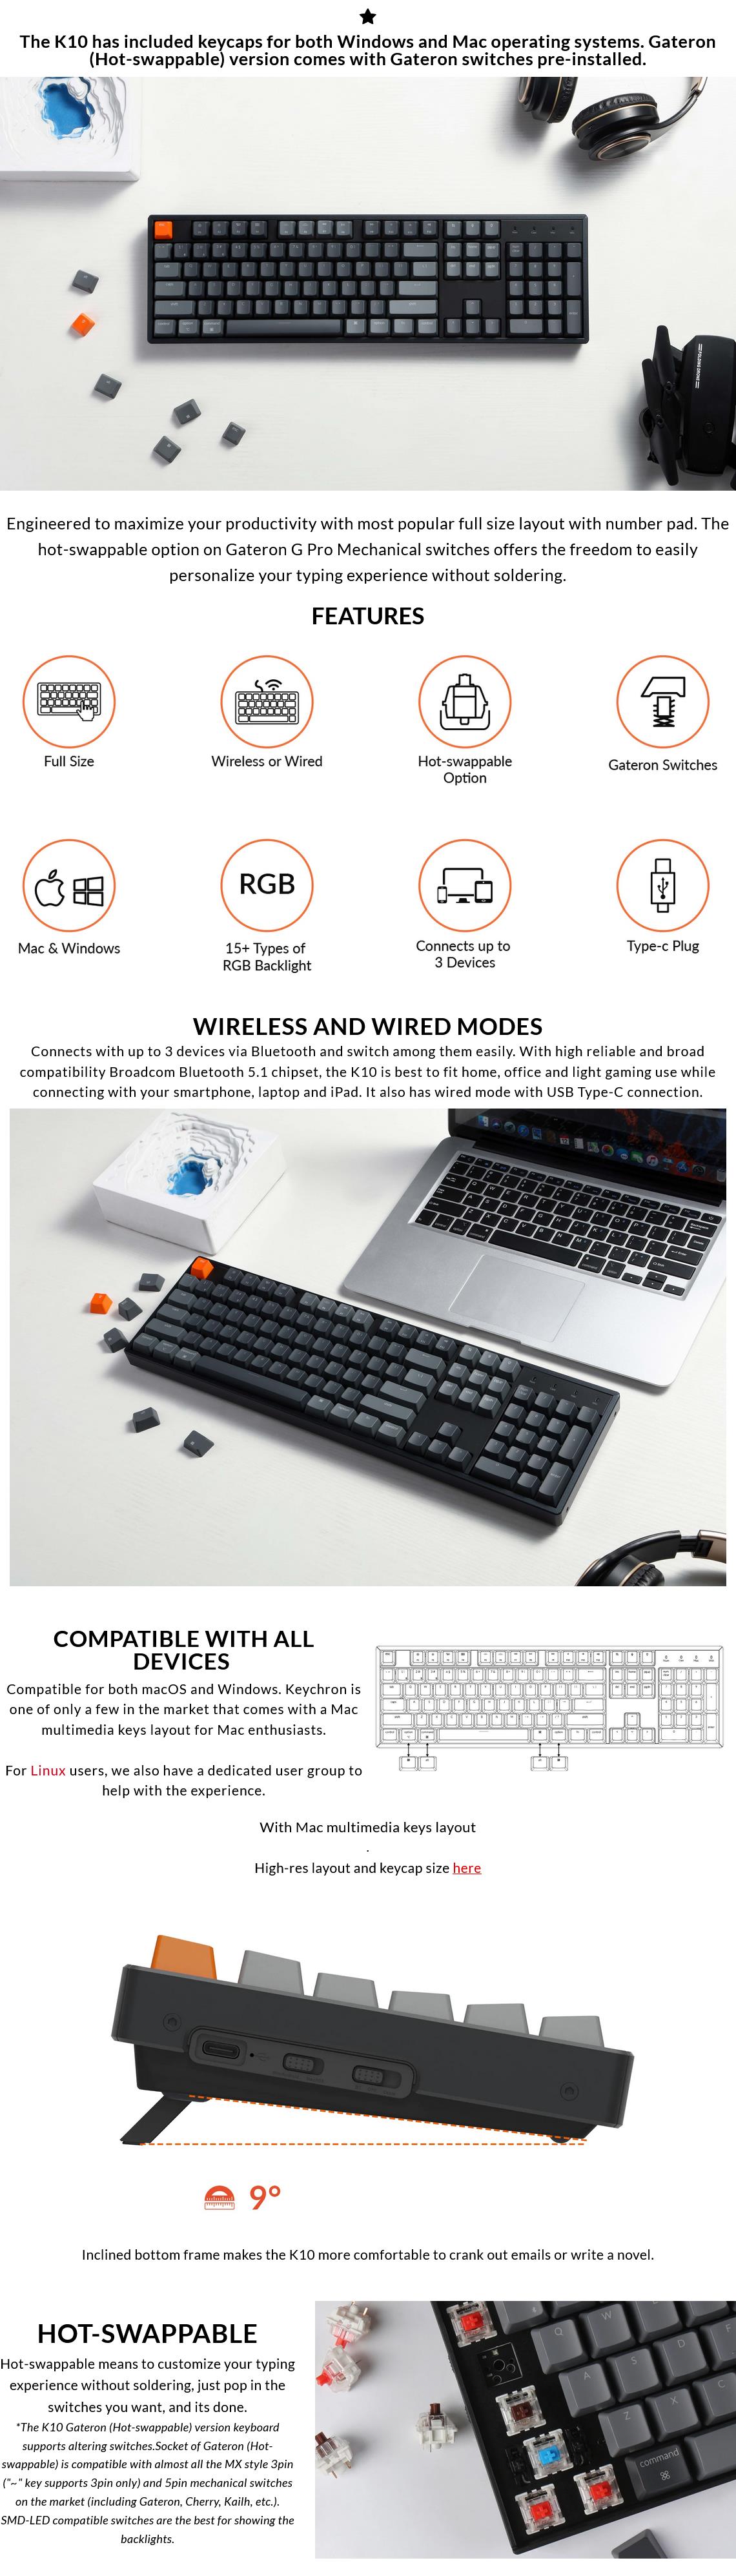 A large marketing image providing additional information about the product Keychron K10 RGB Wireless Mechanical Keyboard (Red Switch) - Additional alt info not provided